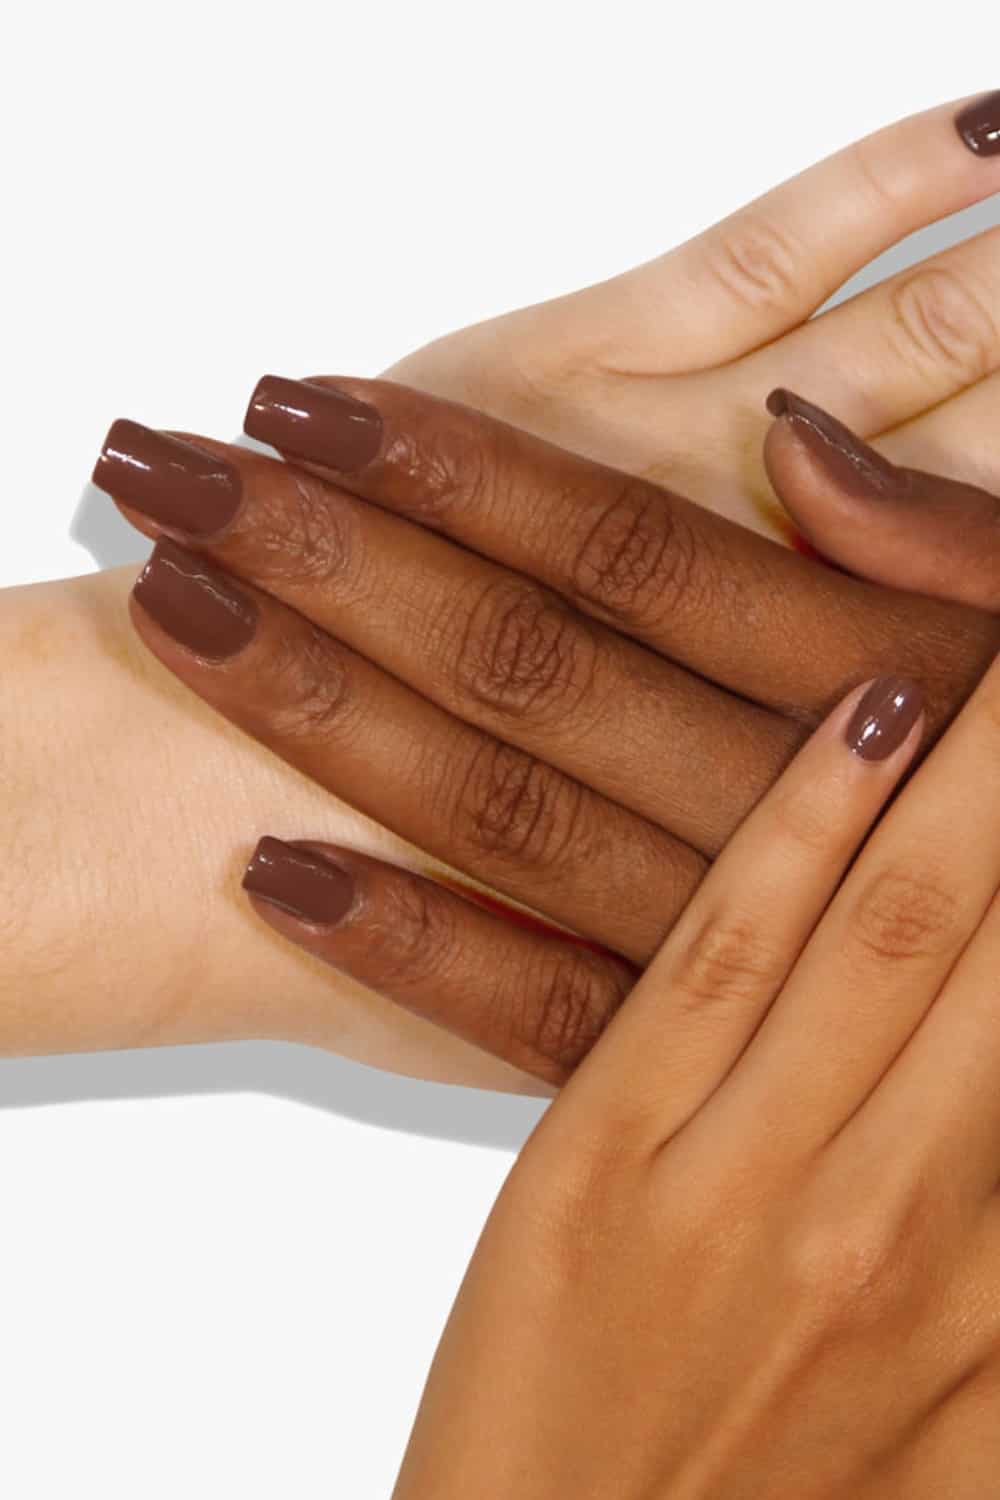 Chocolate brown nail color